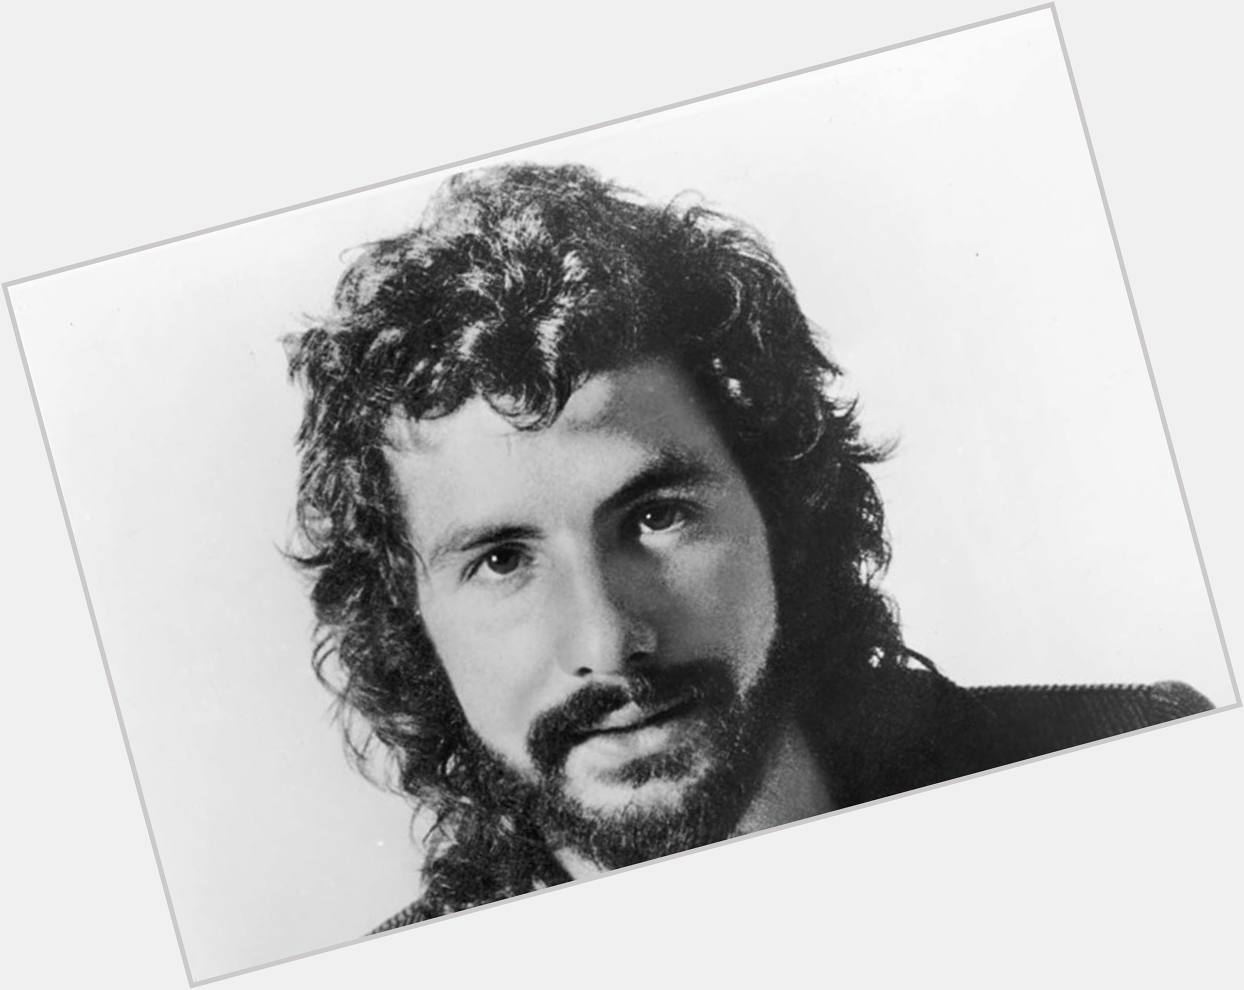   UltClassicRock: Happy birthday, Cat Stevens! We made a list of his Top 10 songs:  